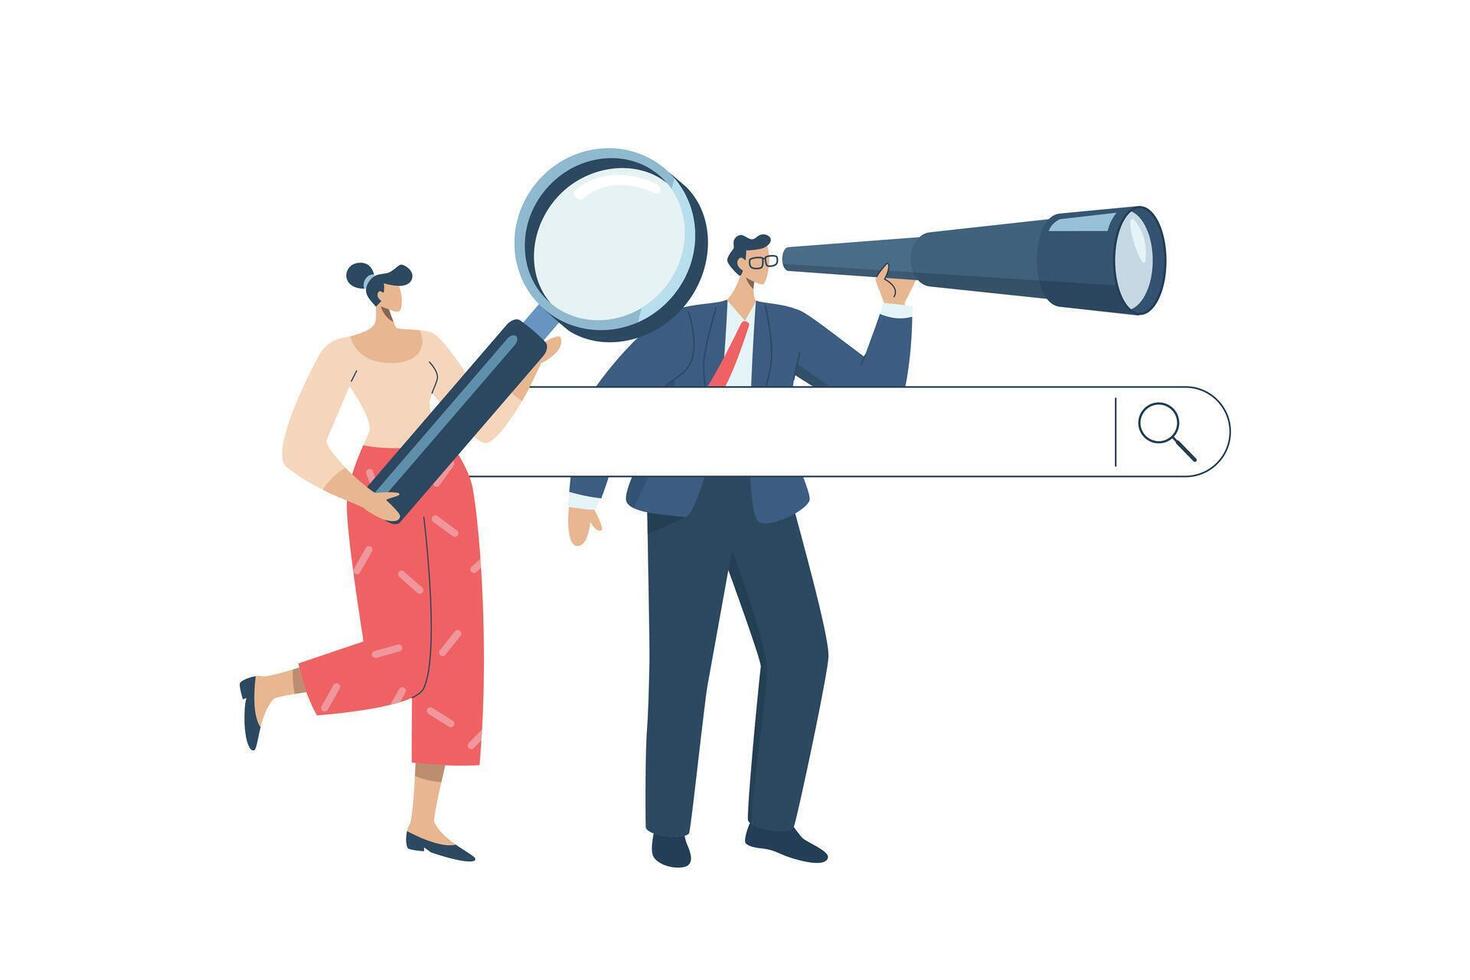 Search for information online, Search engine optimization, Surfing the internet with search engine, Business man and woman with magnifying glass searching for information in website bar. vector